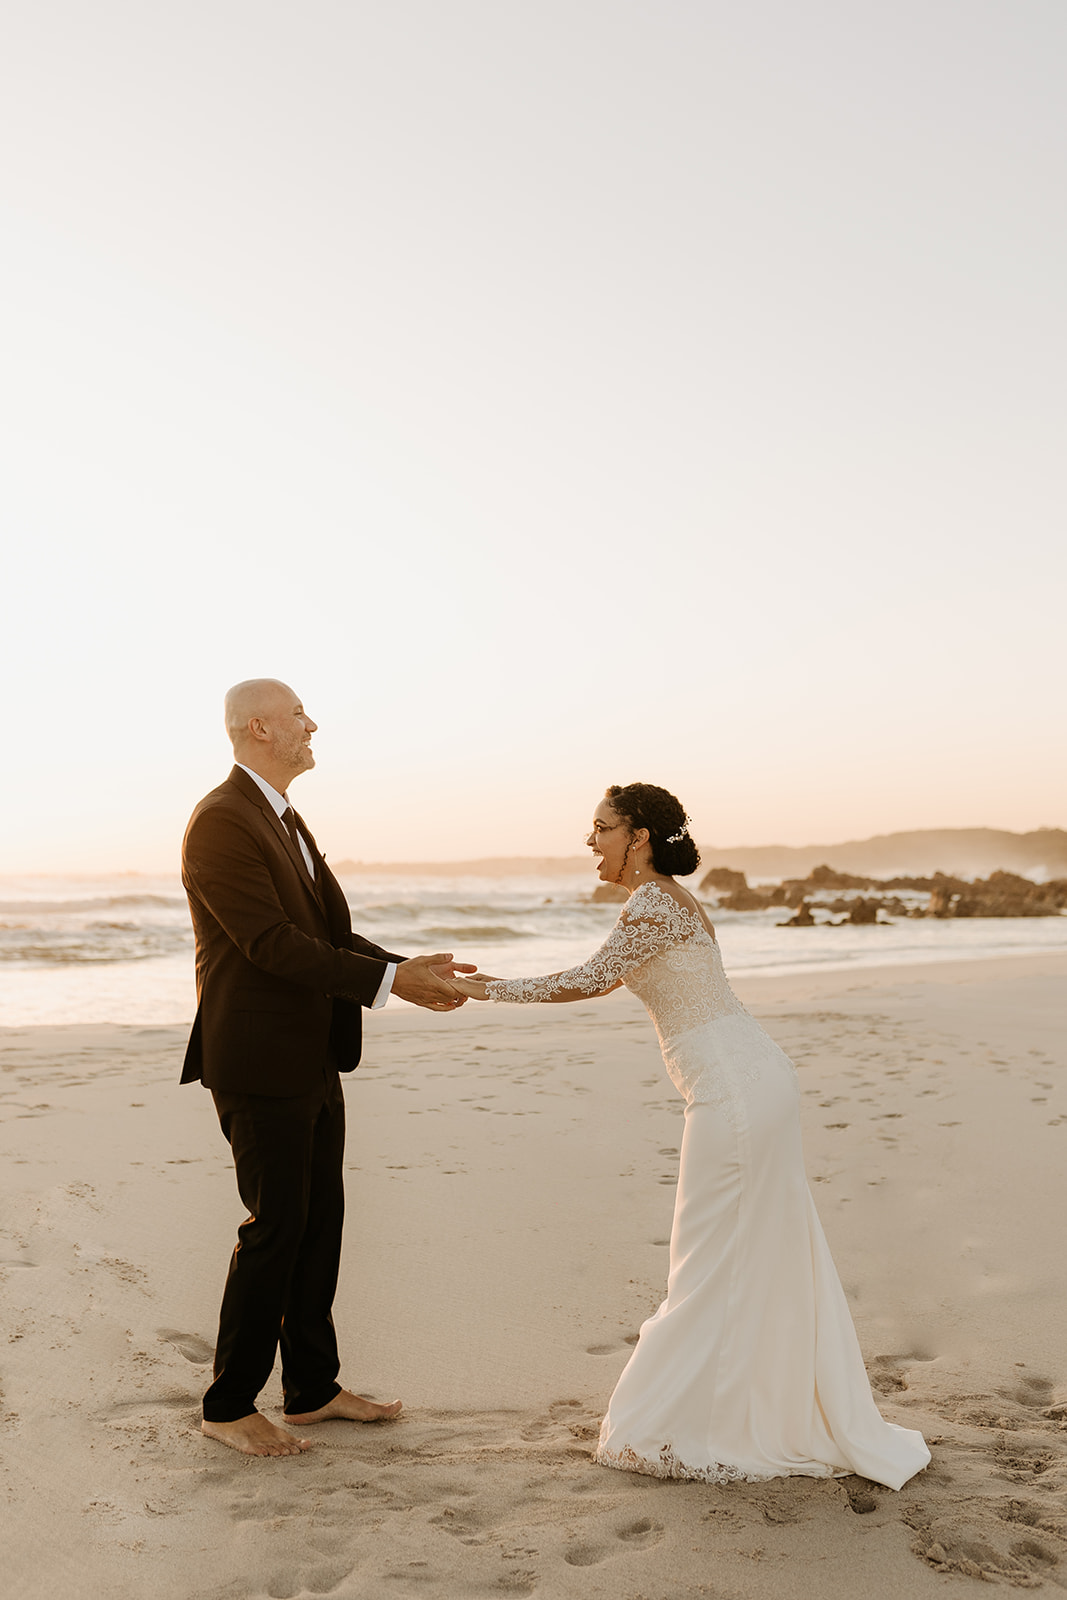 A couple who had an intimate wedding in Pringle Bay together on the beach at sunset